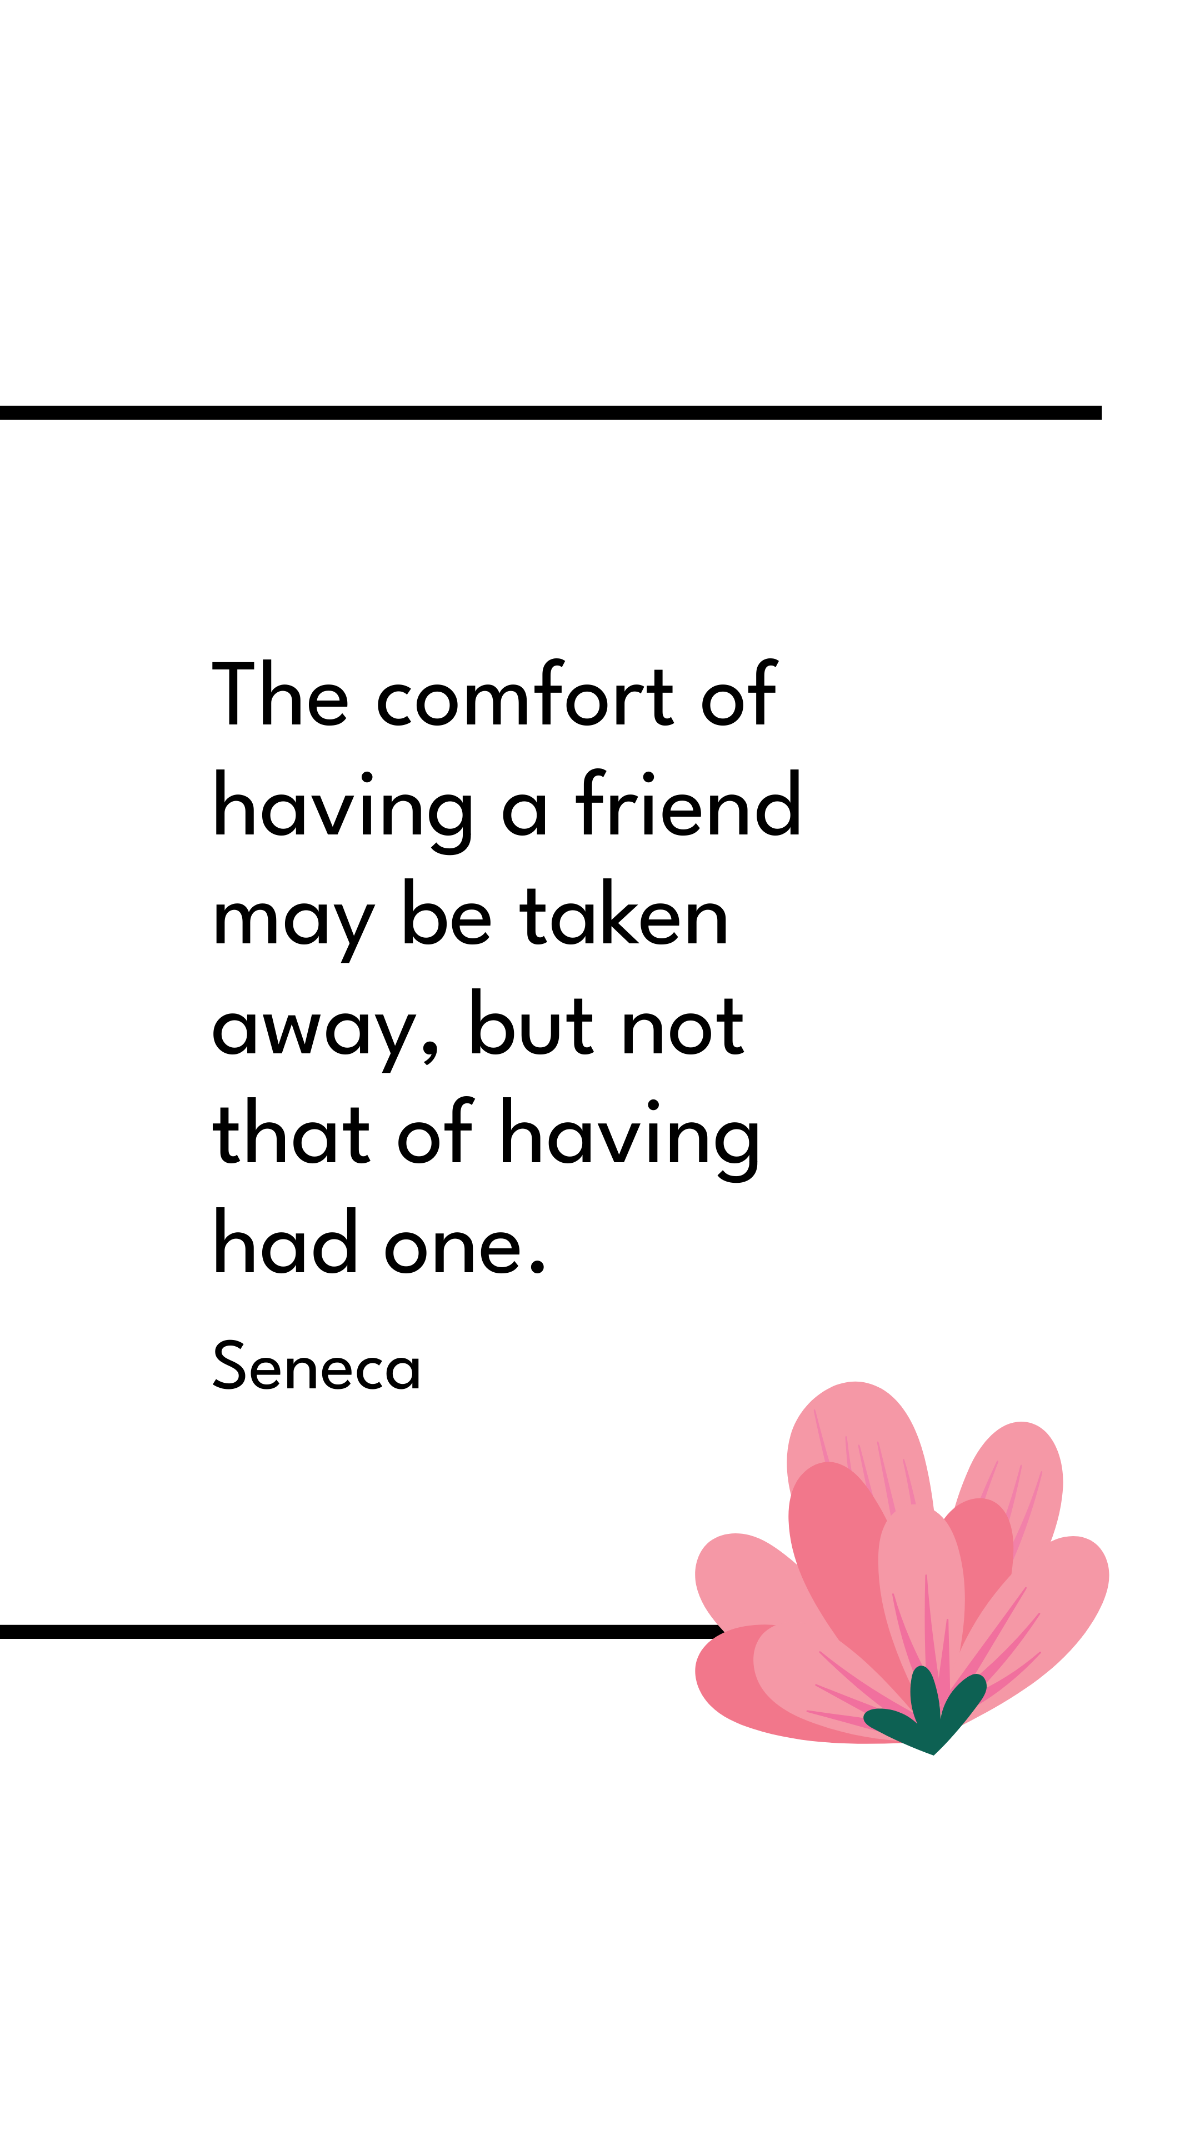 Seneca - The comfort of having a friend may be taken away, but not that of having had one.